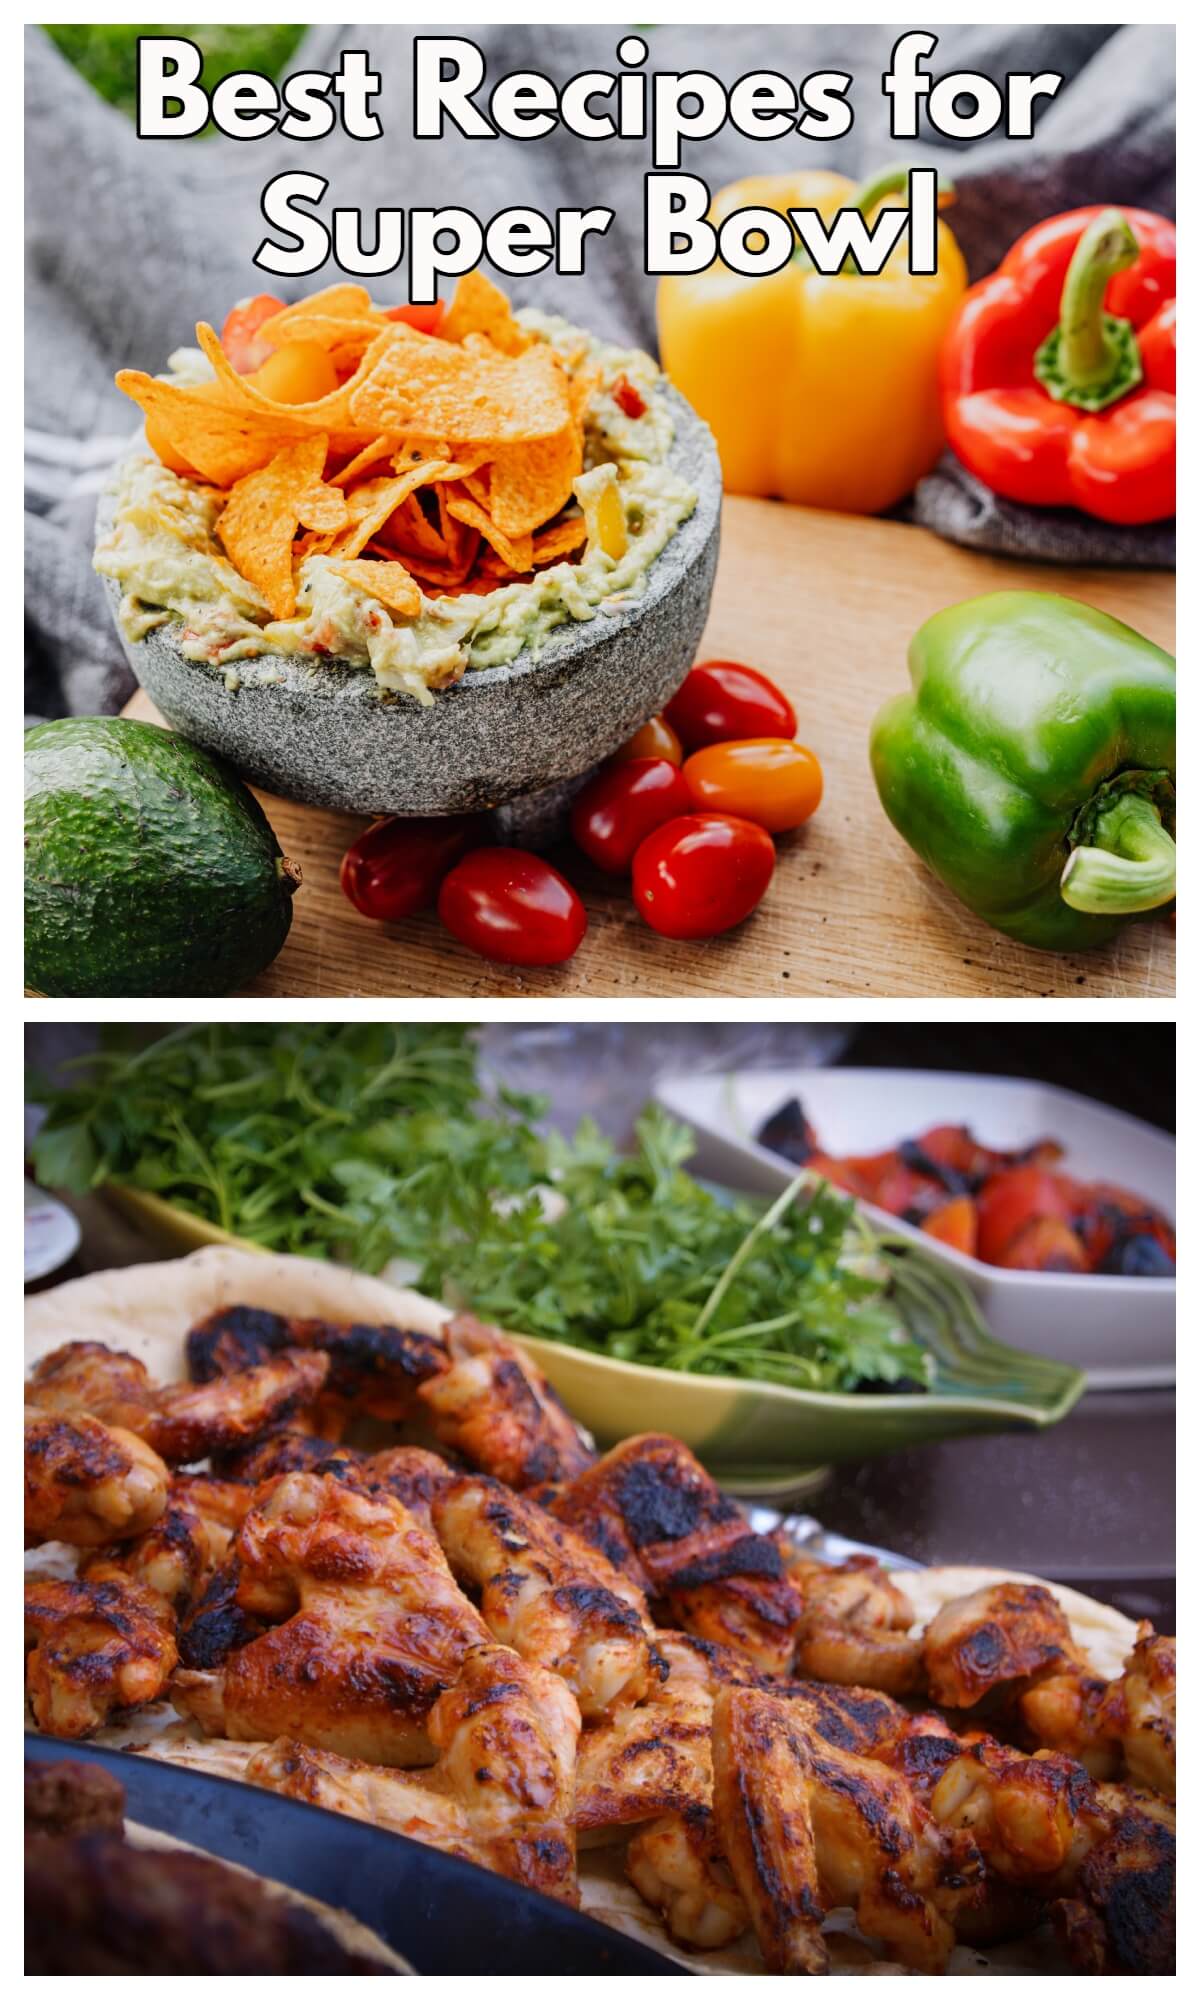 most popular super bowl party recipes i.e., tortilla chips and guacamole in a bowl and chicken wings. Served with a side of fresh veggies and herbs.